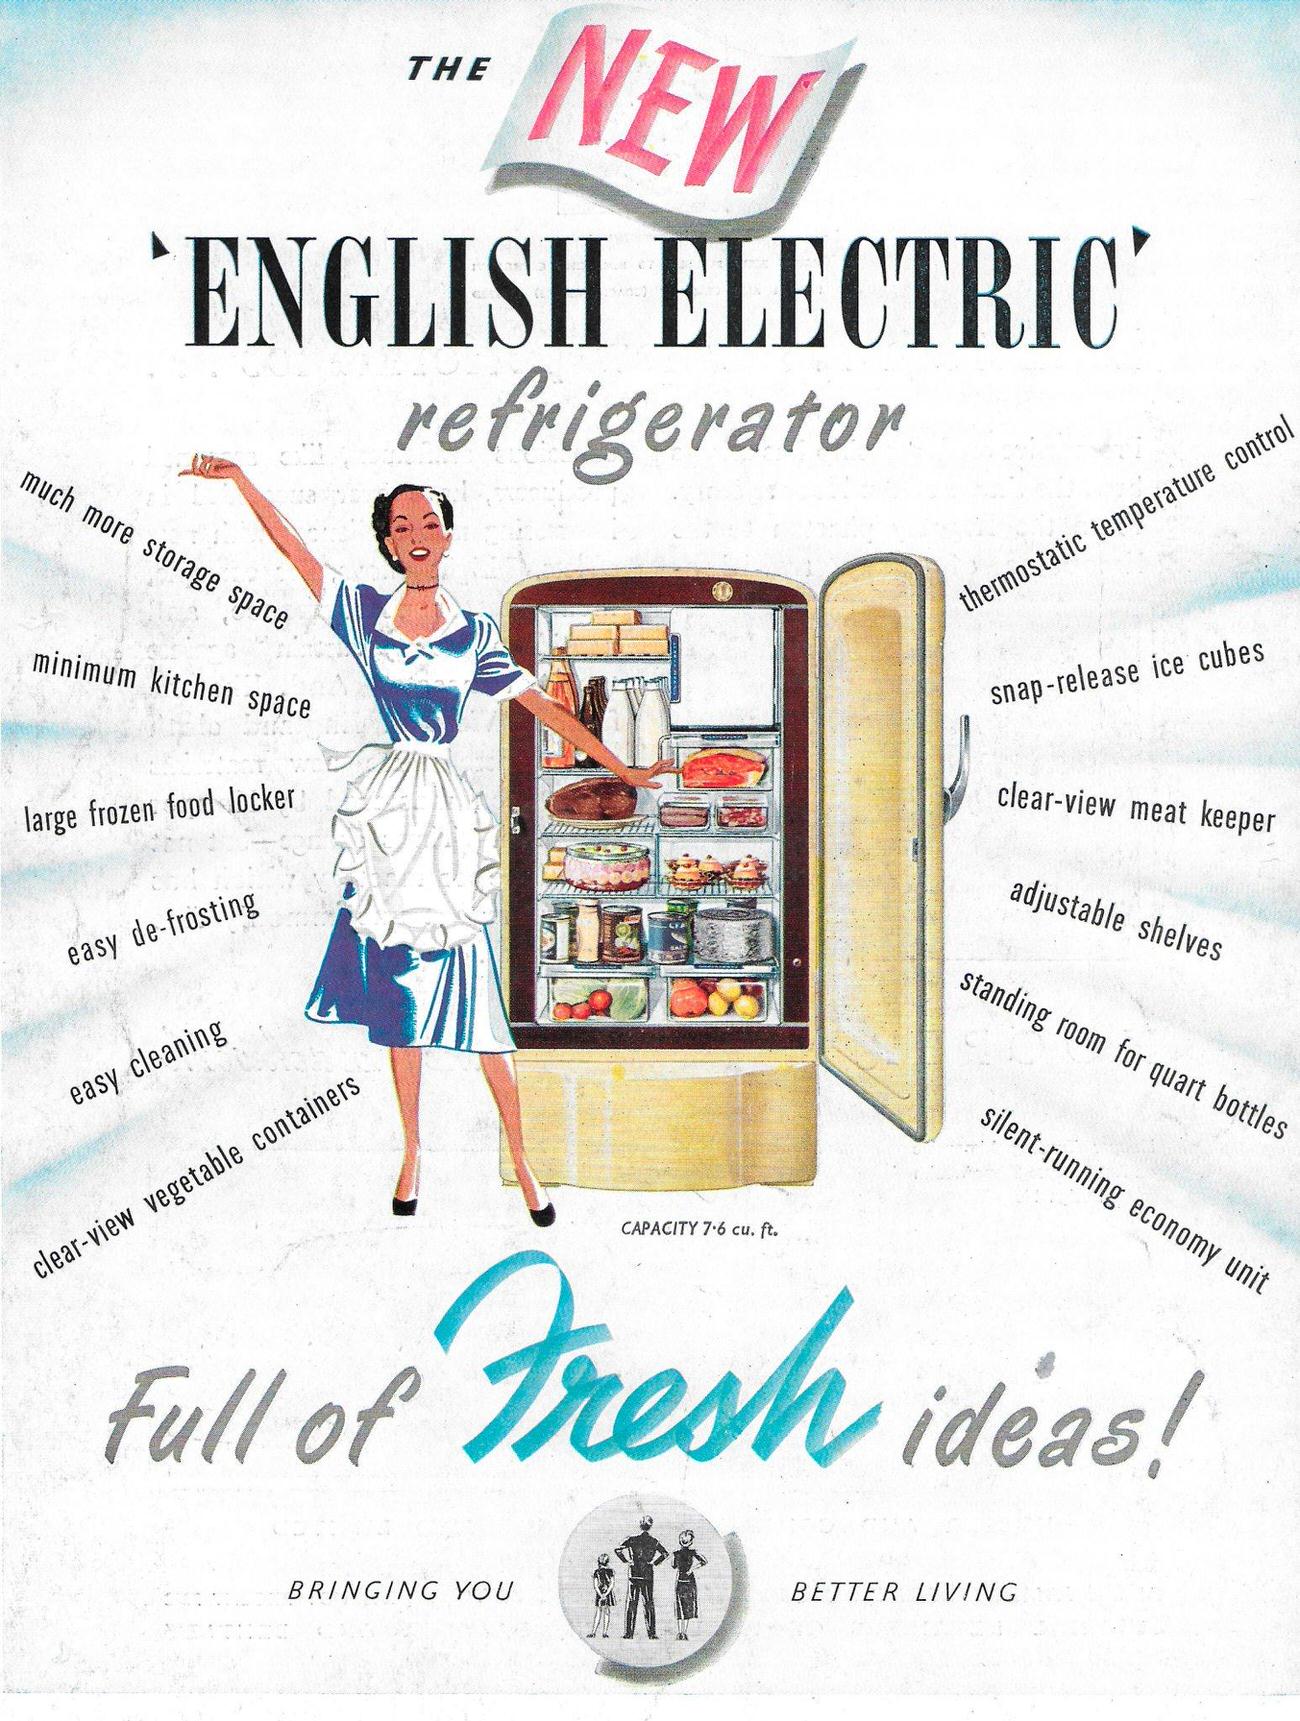 English Electric refrigerator ad in Country Life magazine, UK, 1951.